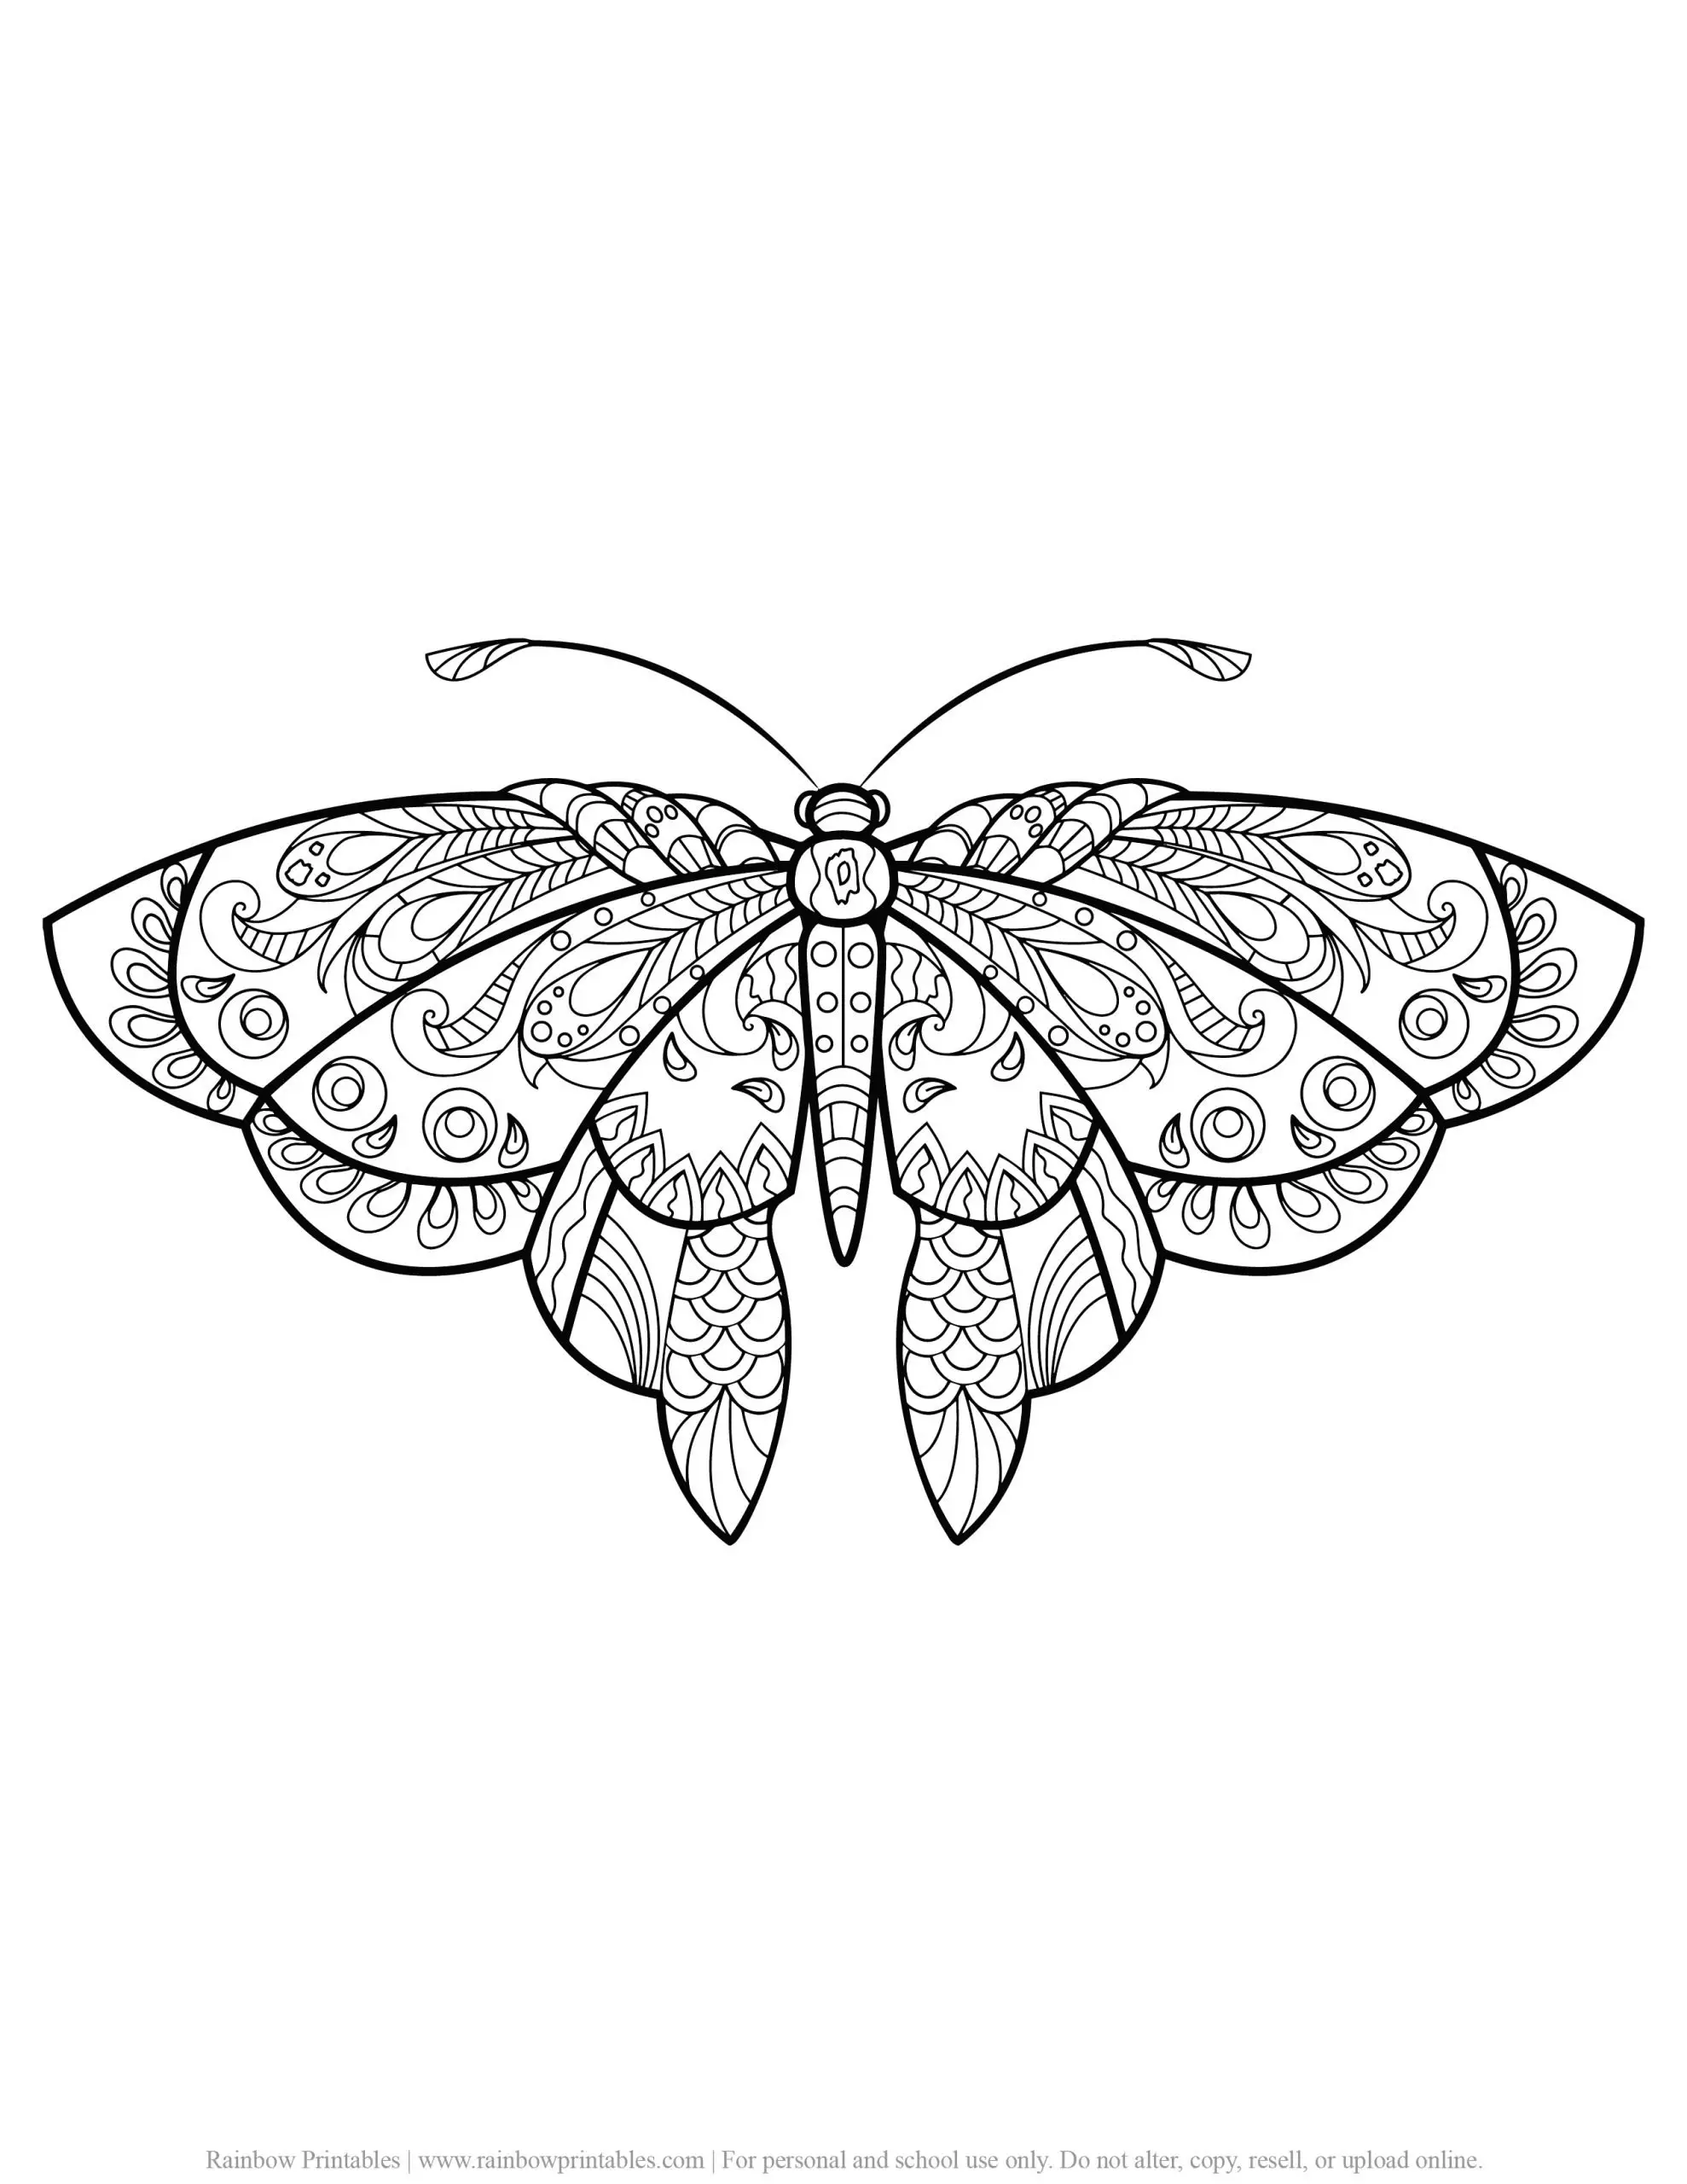 ADULT COLORING PAGES ANTI-STRESS RELIEF PRINTABLE MANDALA PATTERN GROWN UP RELAXING ACTIVITY PRINTABLE BUTTERFLY